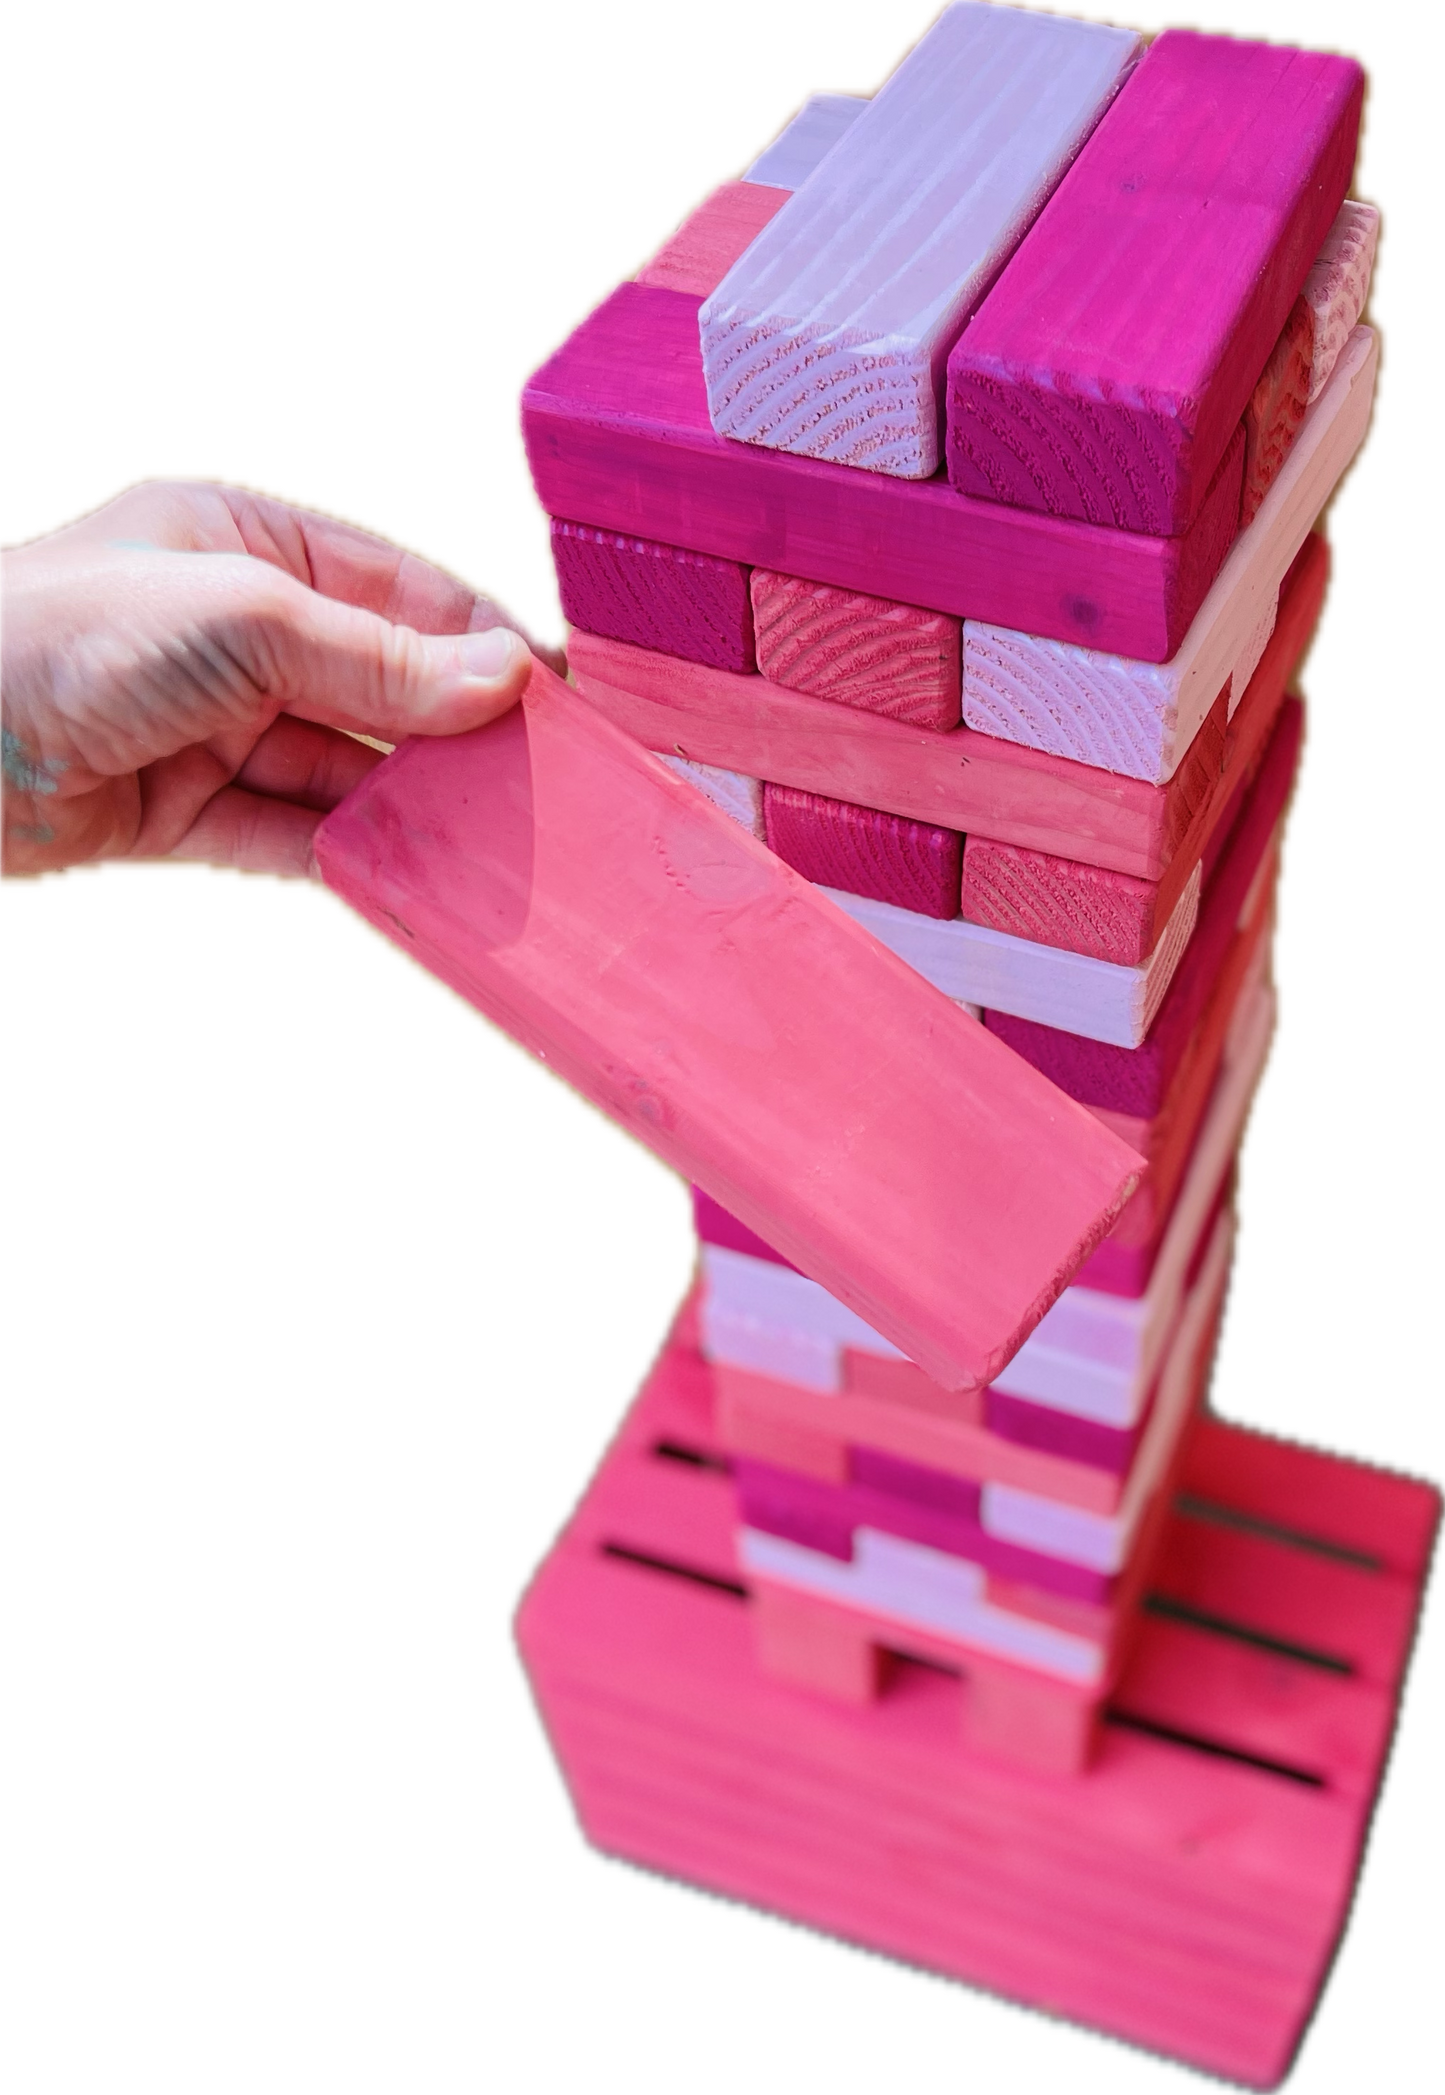 GIANT Tumble Tower GAME Pink, Pink, Pink + CRATE & STAND